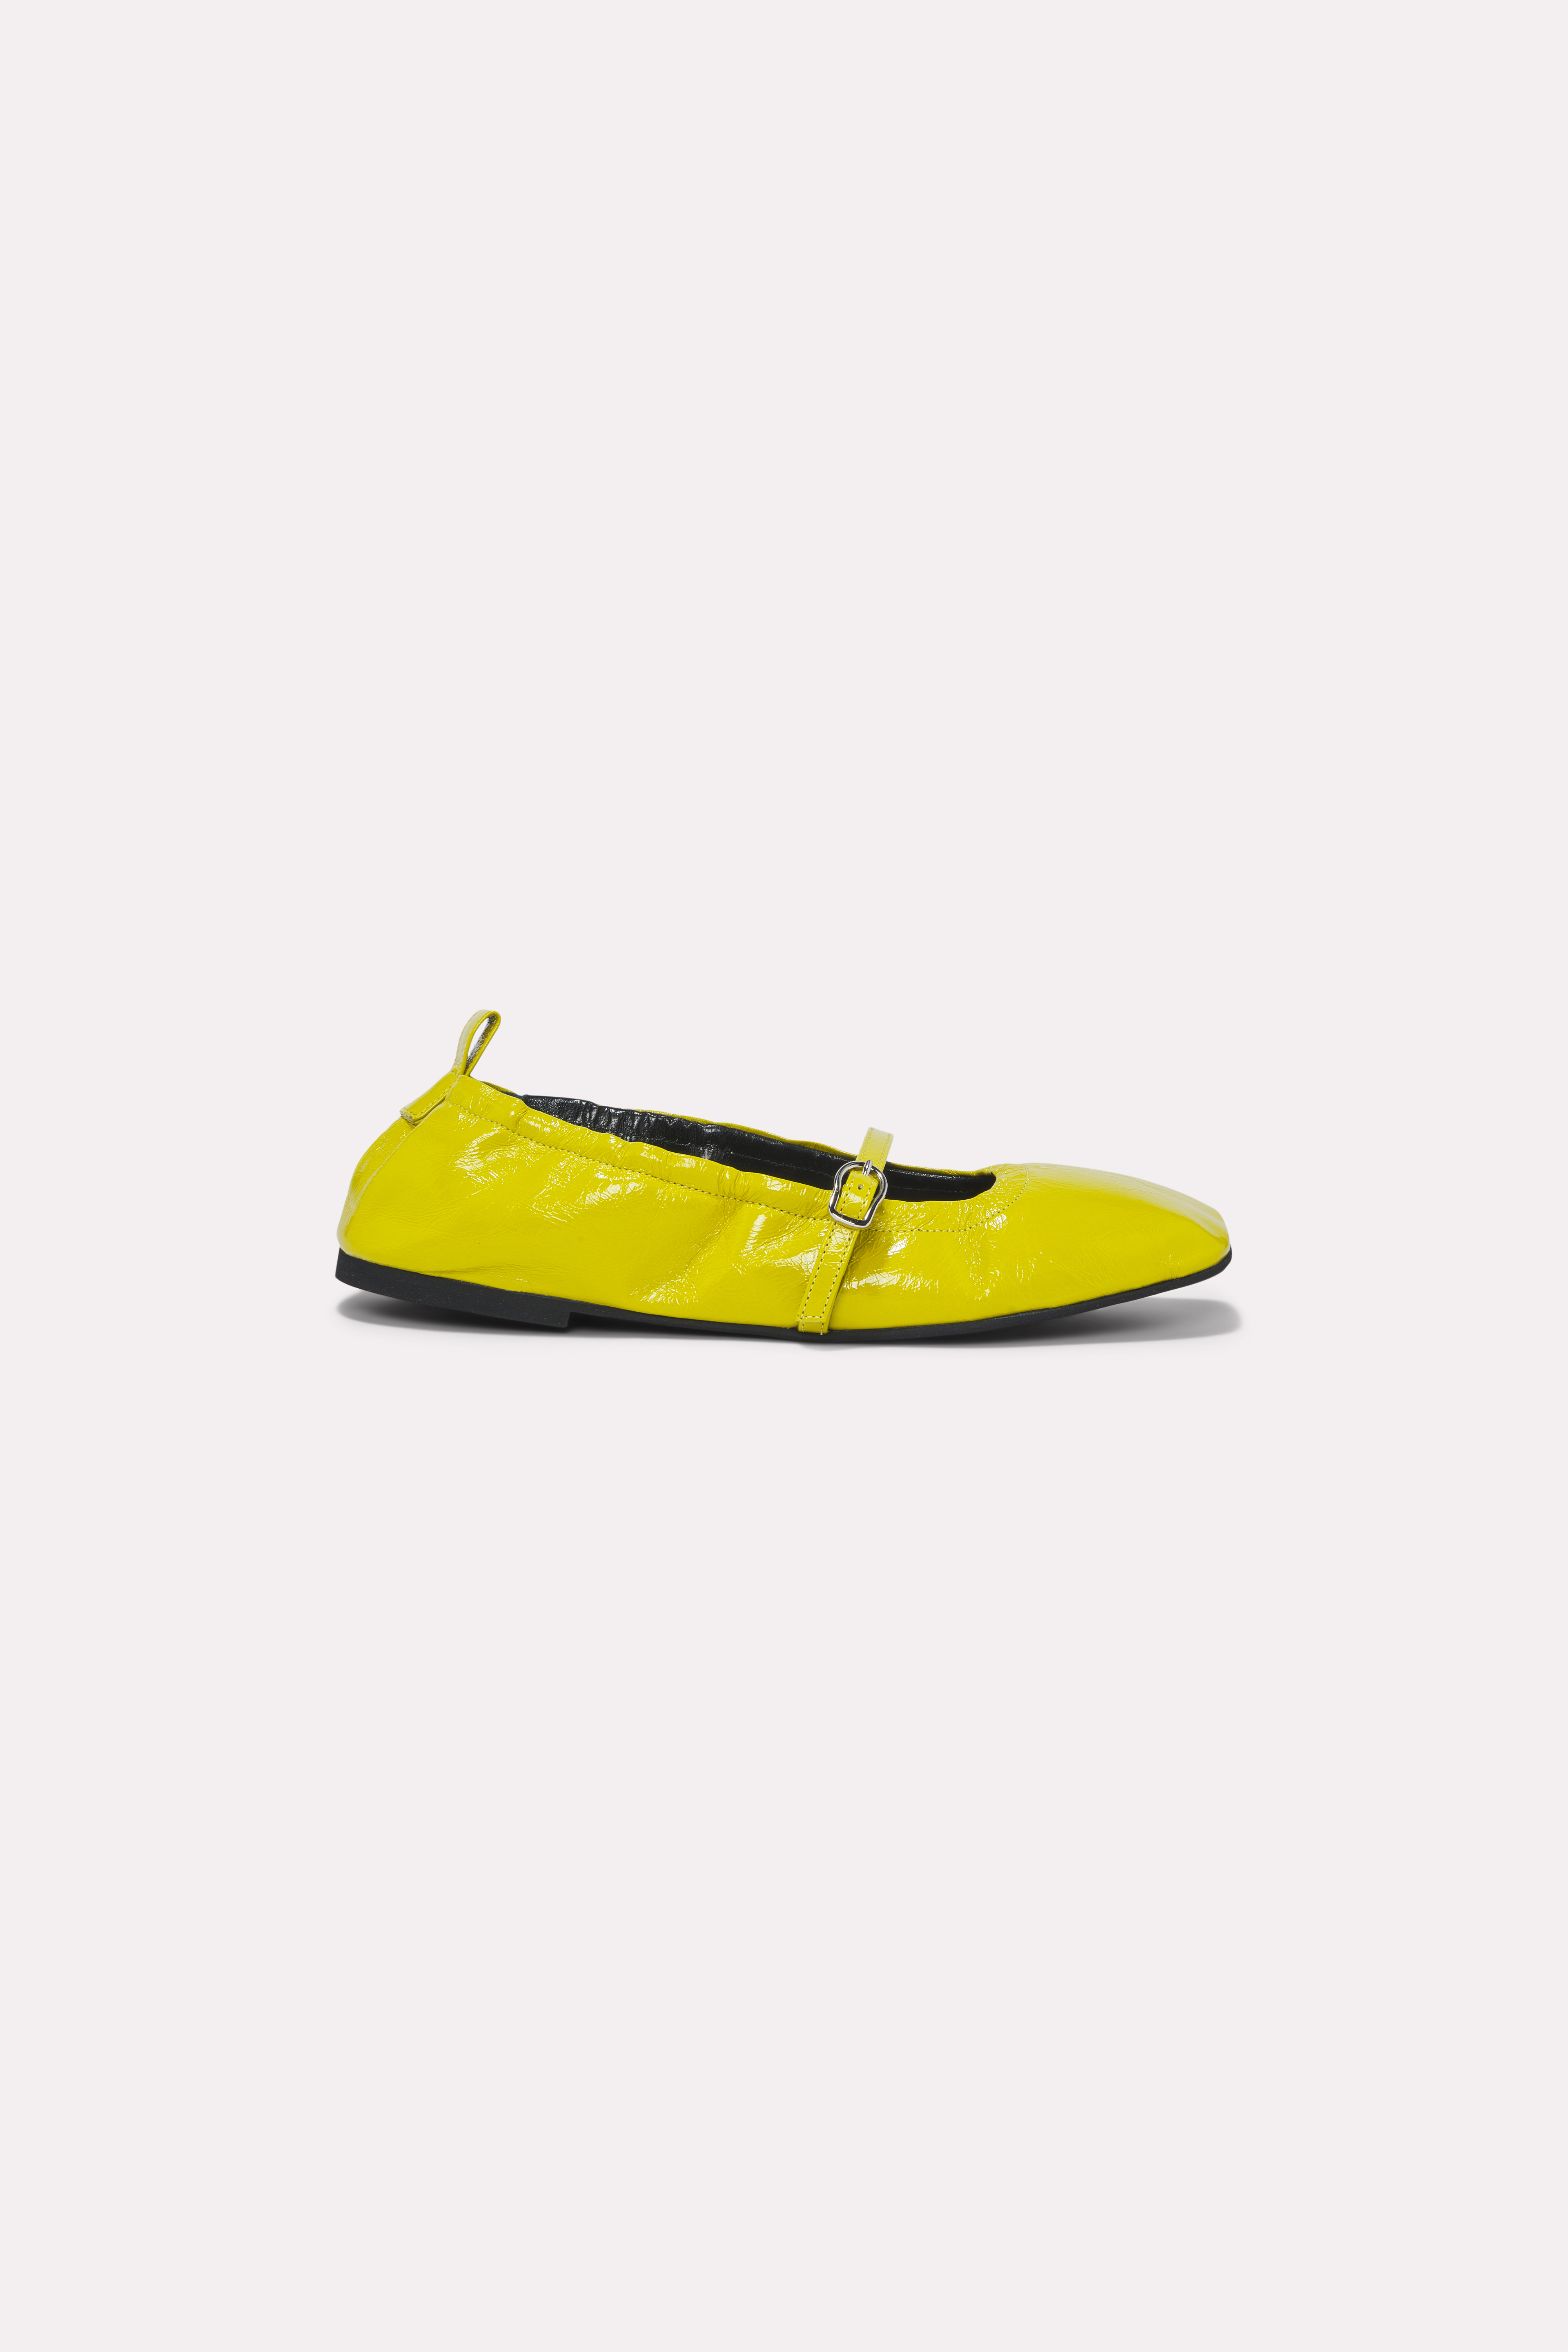 Dorothee Schumacher Square Toe Foldable Ballerinas With Buckle In Yellow